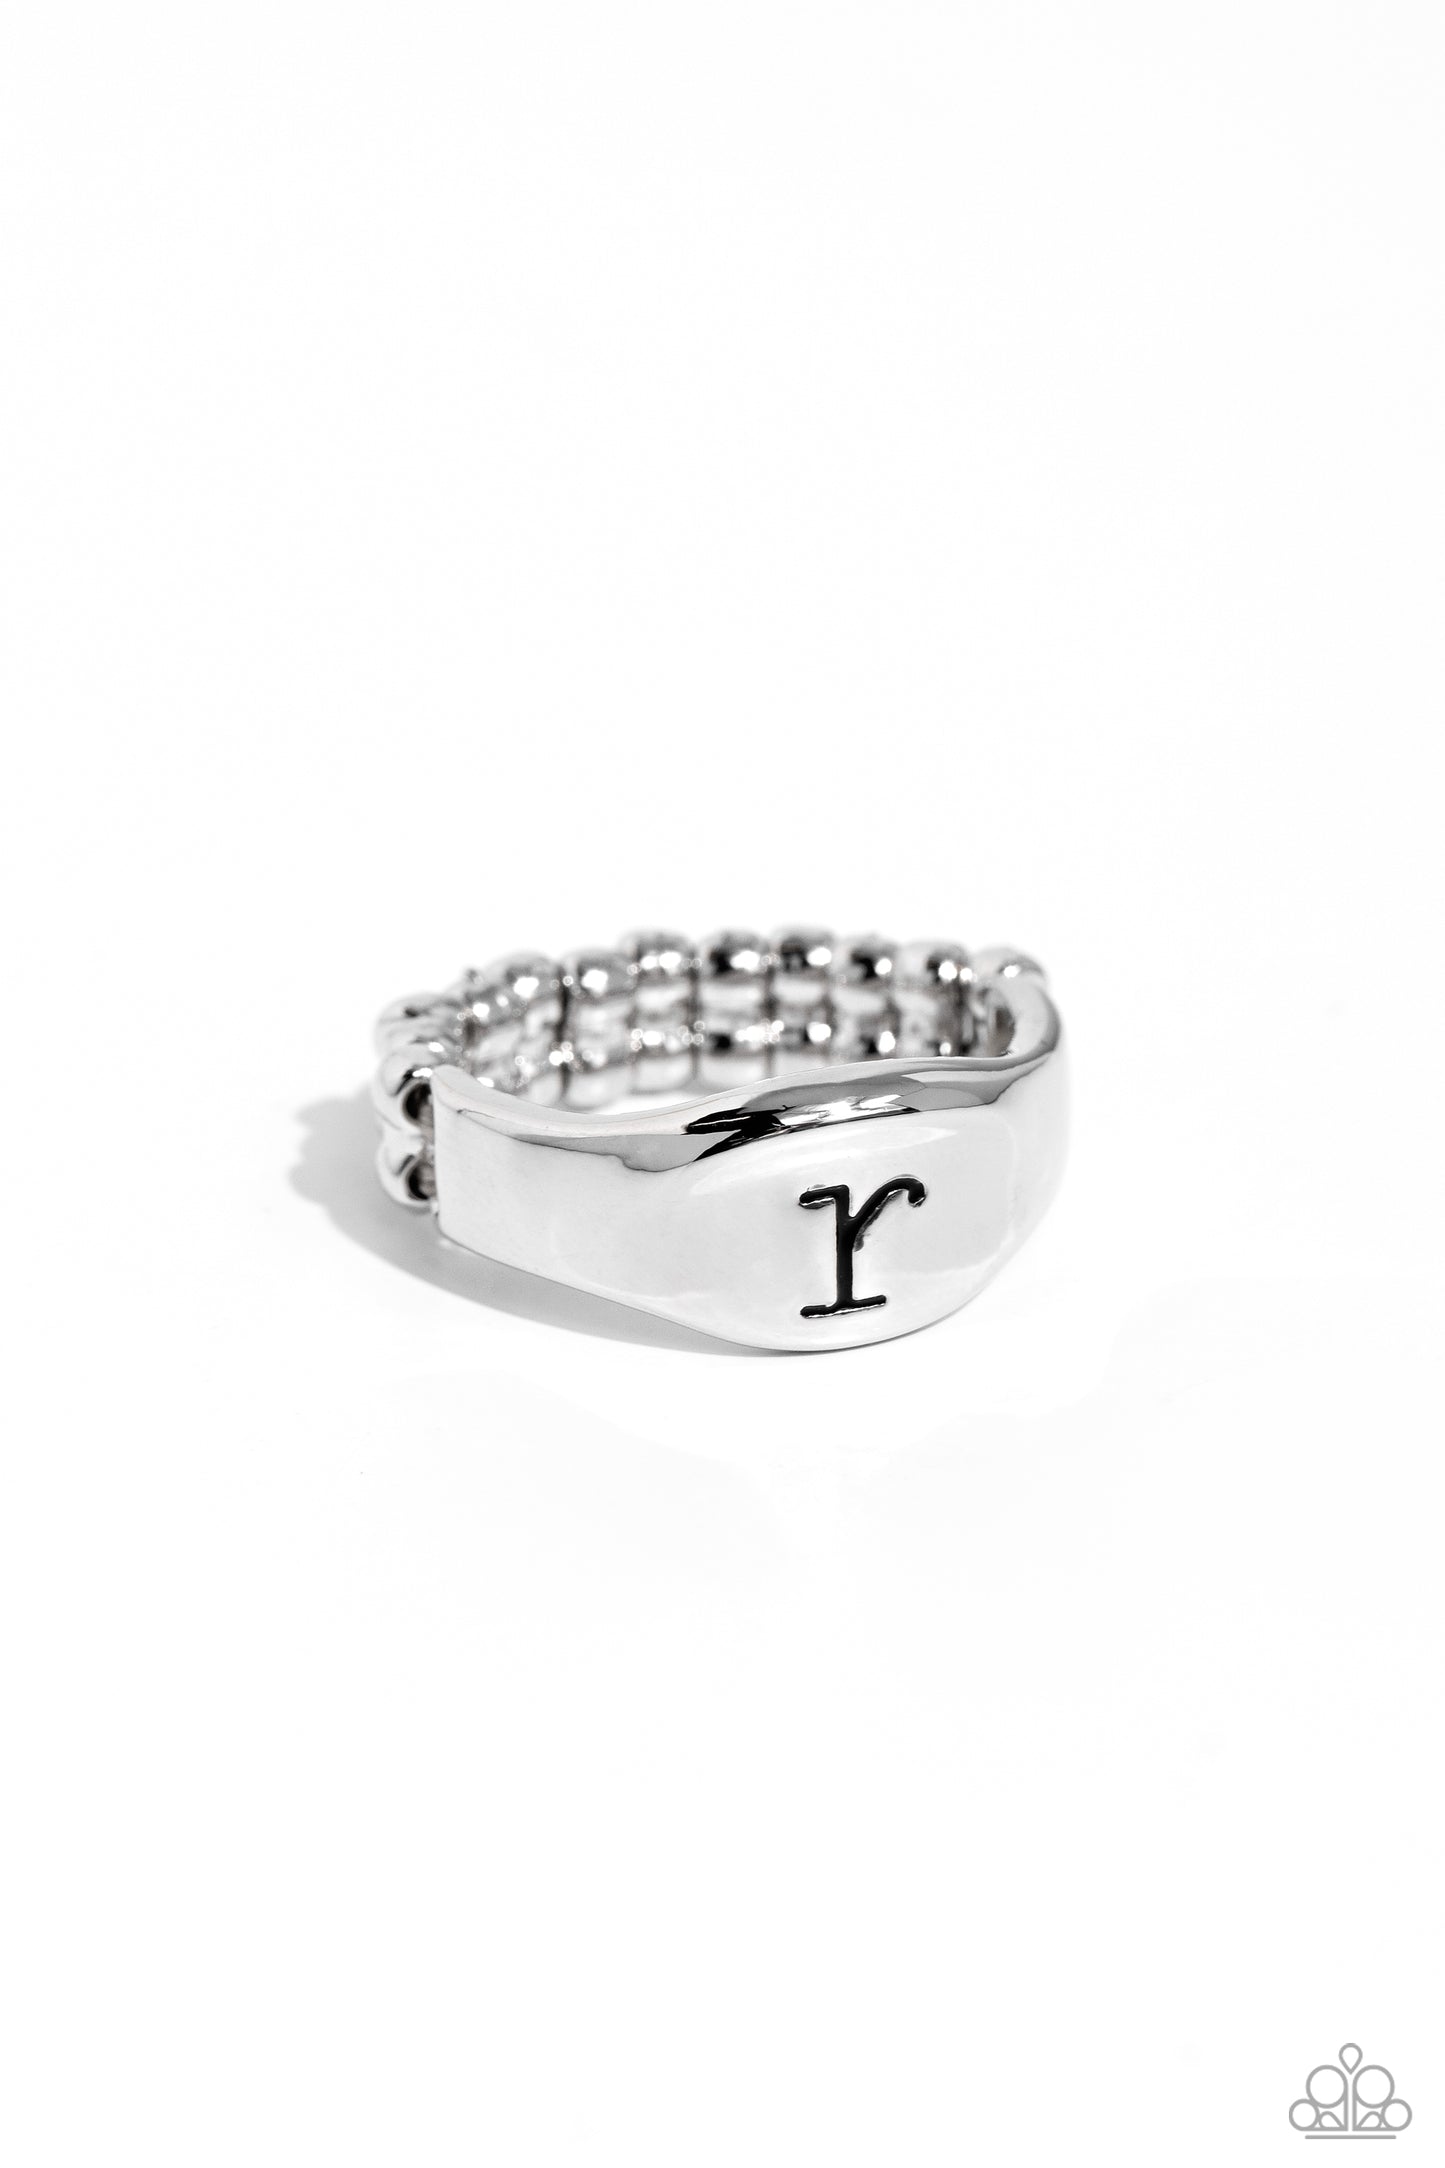 <p>Pressed into the center of a beveled silver band, the black letter "r" stands out for a simple, sentimental centerpiece. Features a stretchy band for a flexible fit.</p> <p><i> Sold as one individual ring.</i></p>